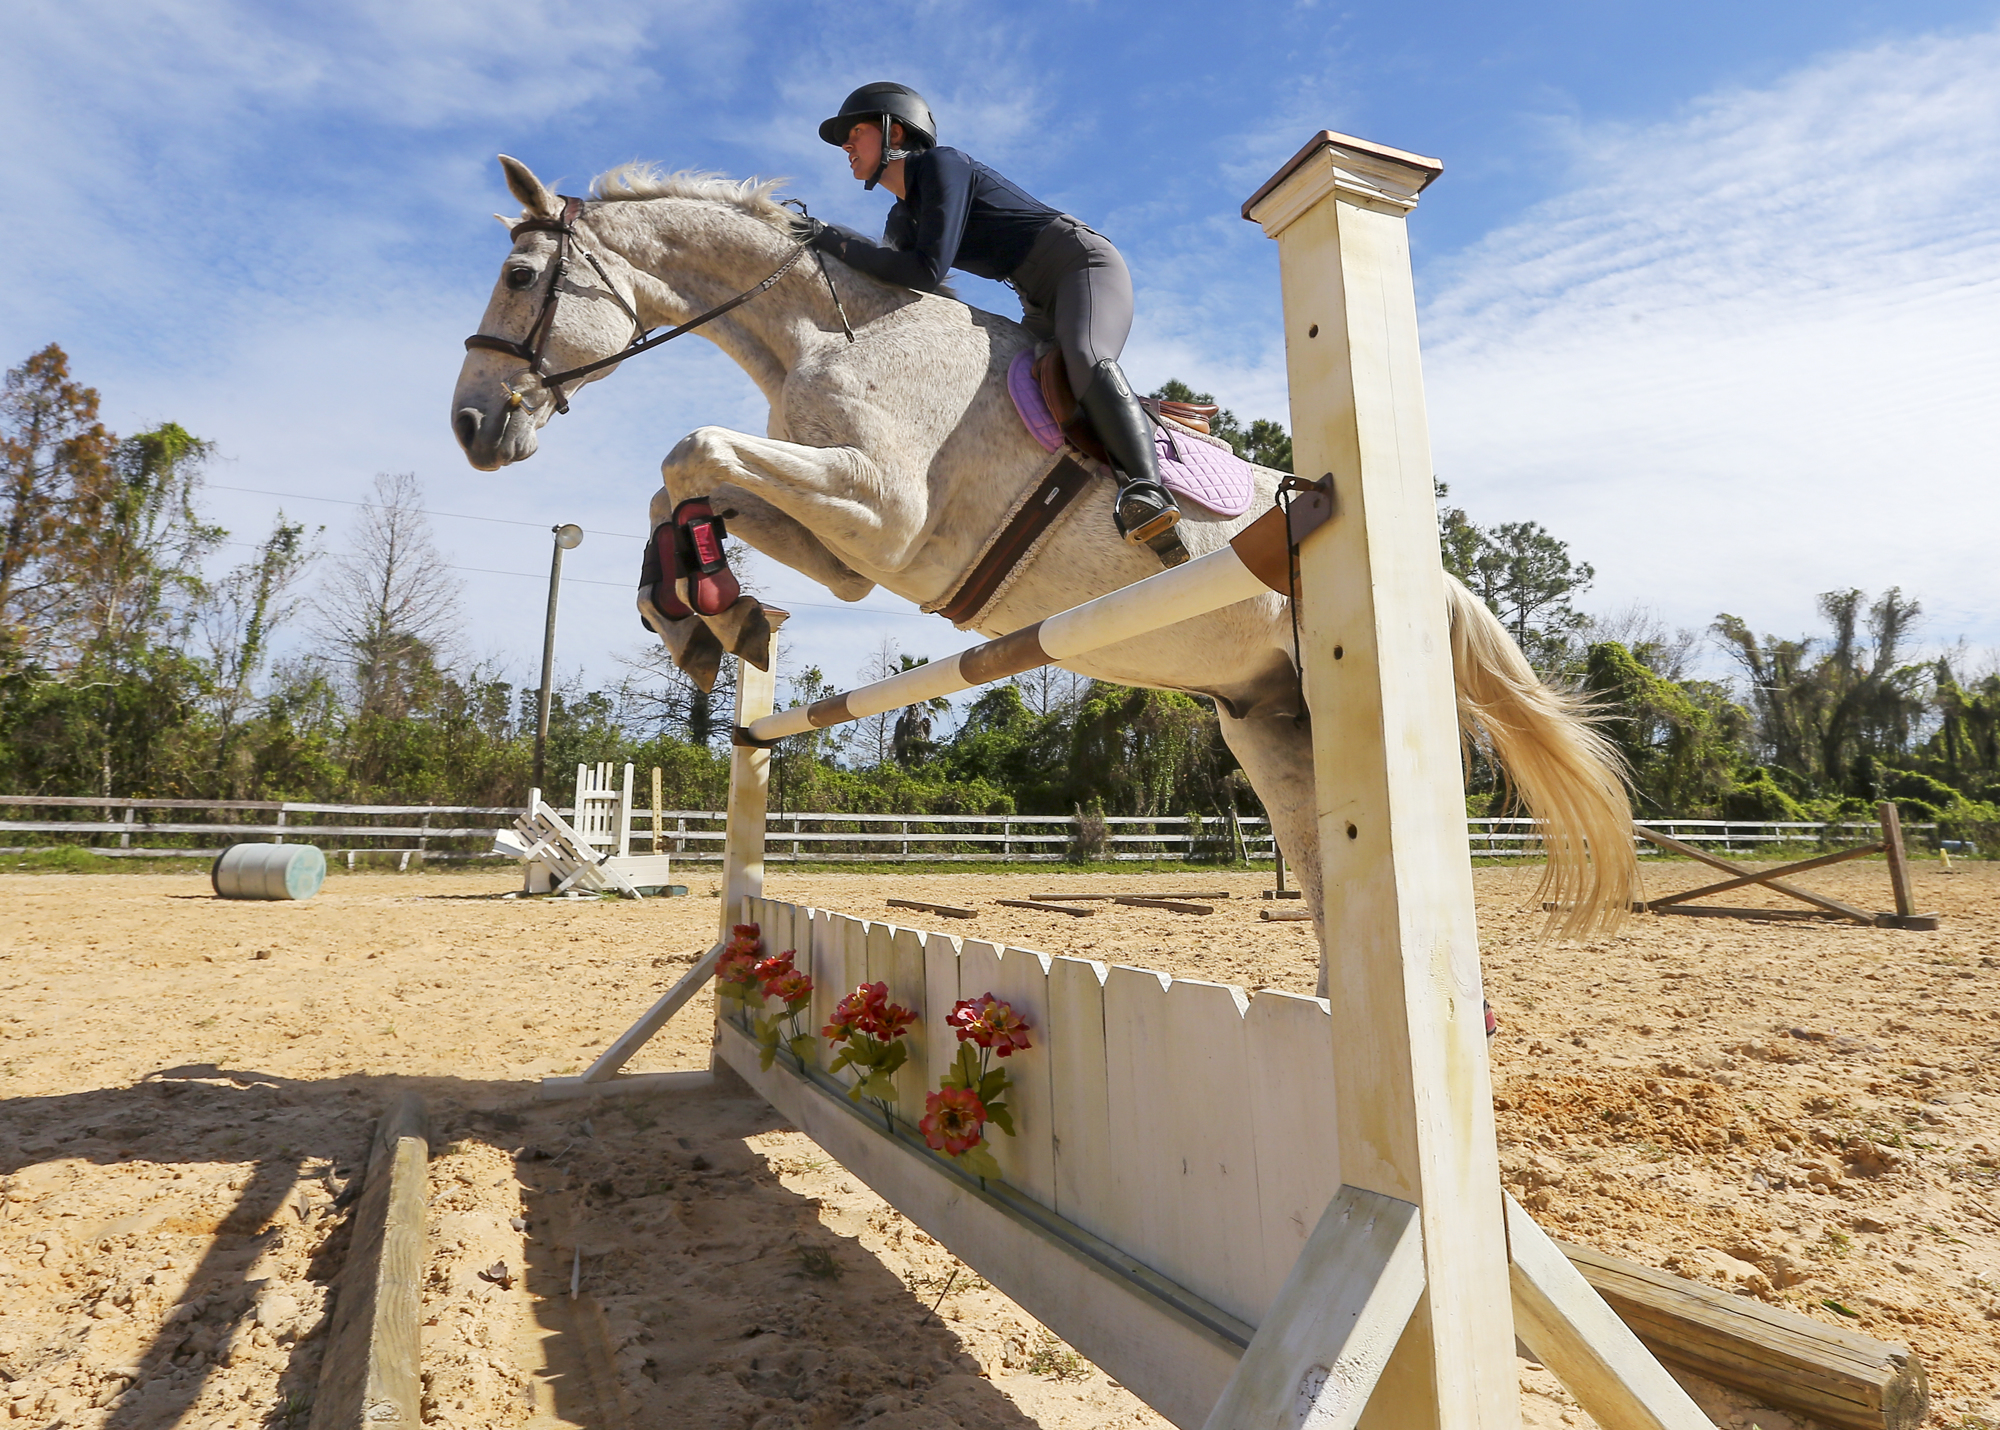 Kate Johnstone is one of many equestrian athletes who spent time practicing at Sunnybrook Farm in Winter Garden.